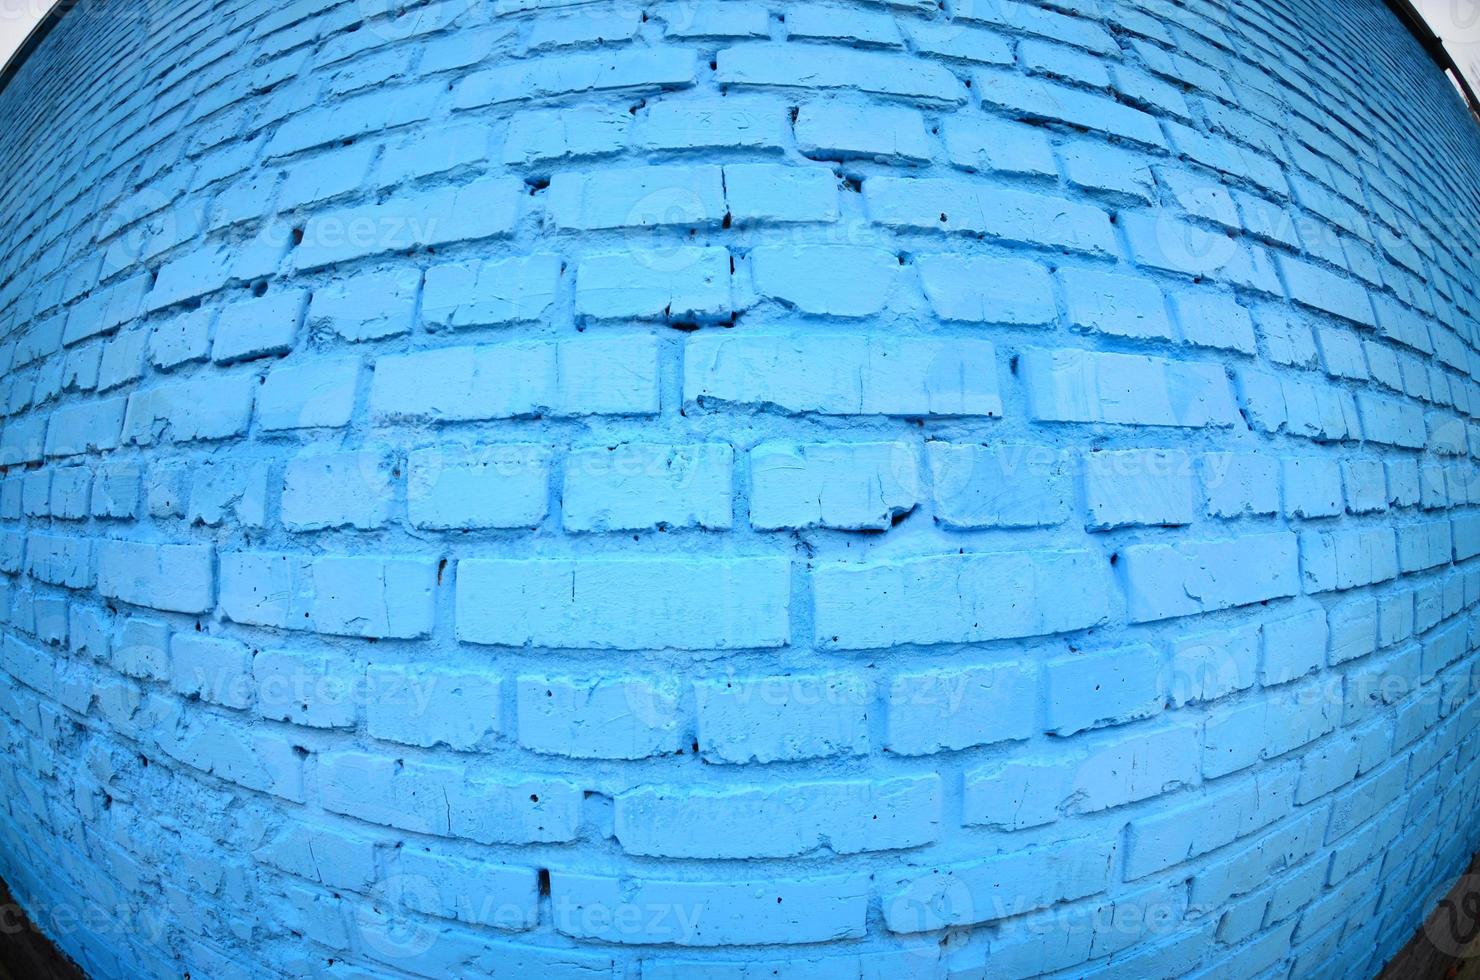 Large brick wall, painted in blue. Fisheye photo with pronounced distortion